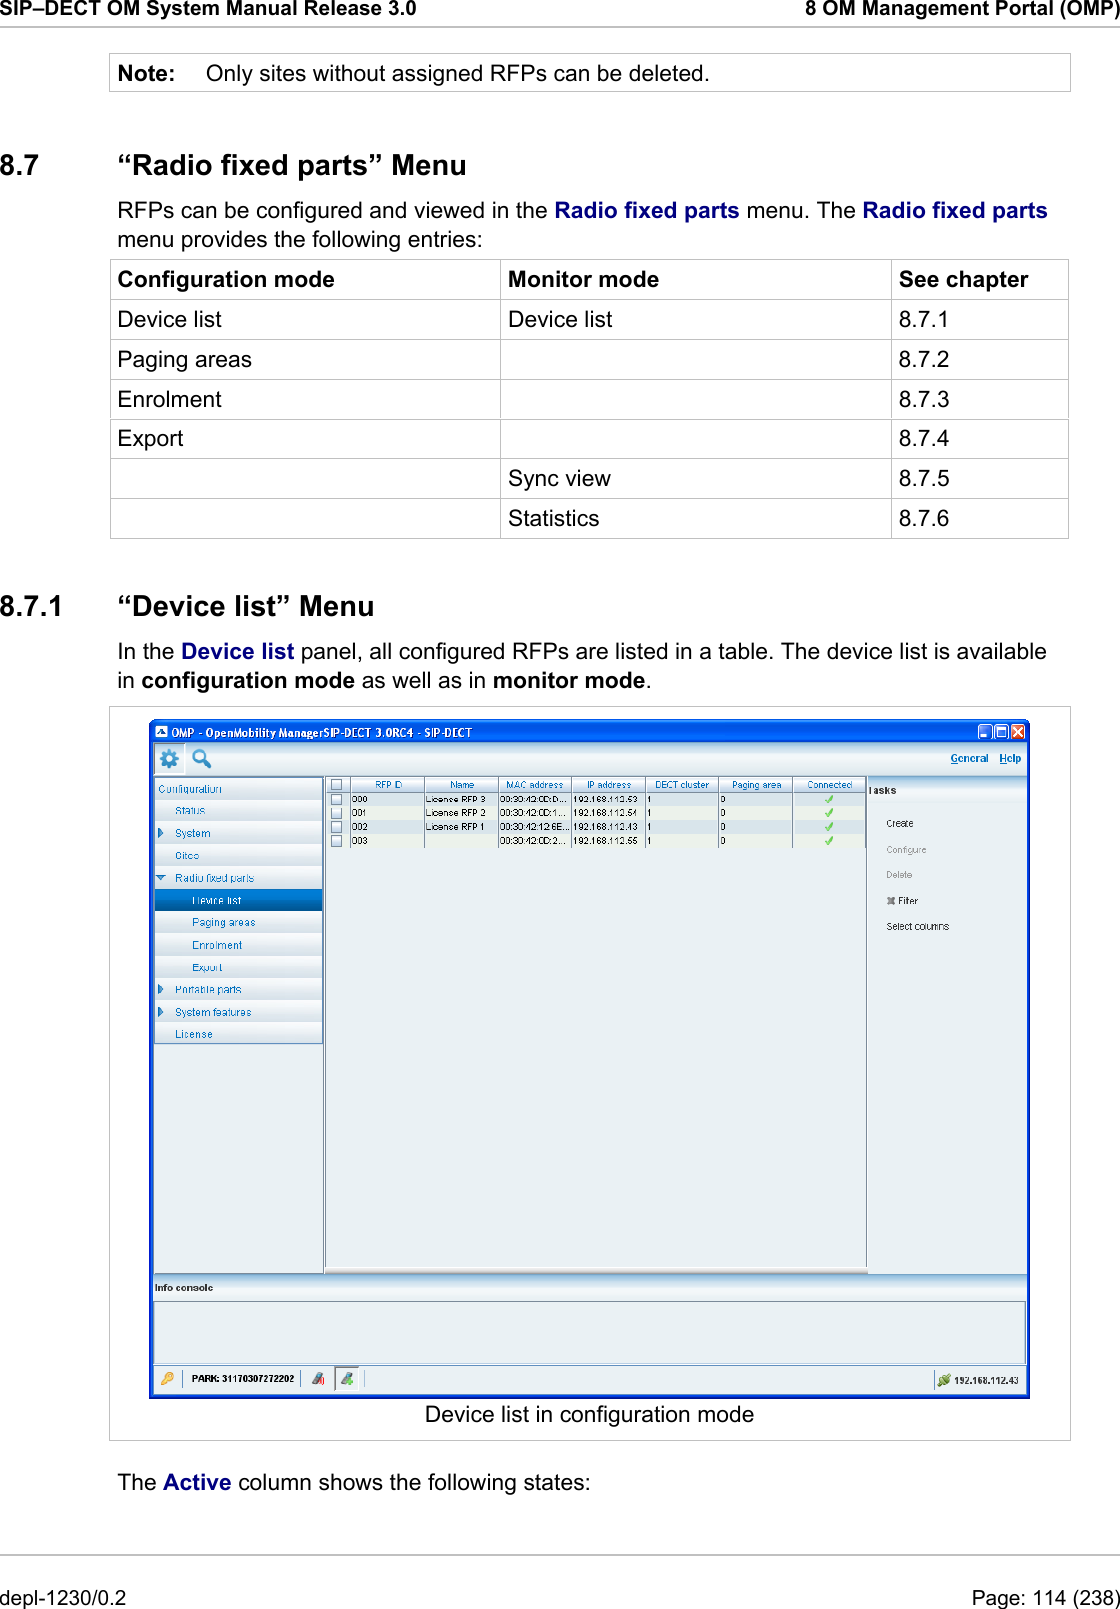 SIP–DECT OM System Manual Release 3.0  8 OM Management Portal (OMP) Note:  Only sites without assigned RFPs can be deleted. 8.7  “Radio fixed parts” Menu RFPs can be configured and viewed in the Radio fixed parts menu. The Radio fixed parts menu provides the following entries: Configuration mode  Monitor mode  See chapter Device list  Device list  8.7.1 Paging areas    8.7.2 Enrolment   8.7.3 Export   8.7.4  Sync view 8.7.5  Statistics 8.7.6 8.7.1  “Device list” Menu In the Device list panel, all configured RFPs are listed in a table. The device list is available in configuration mode as well as in monitor mode.   Device list in configuration mode The Active column shows the following states: depl-1230/0.2  Page: 114 (238) 